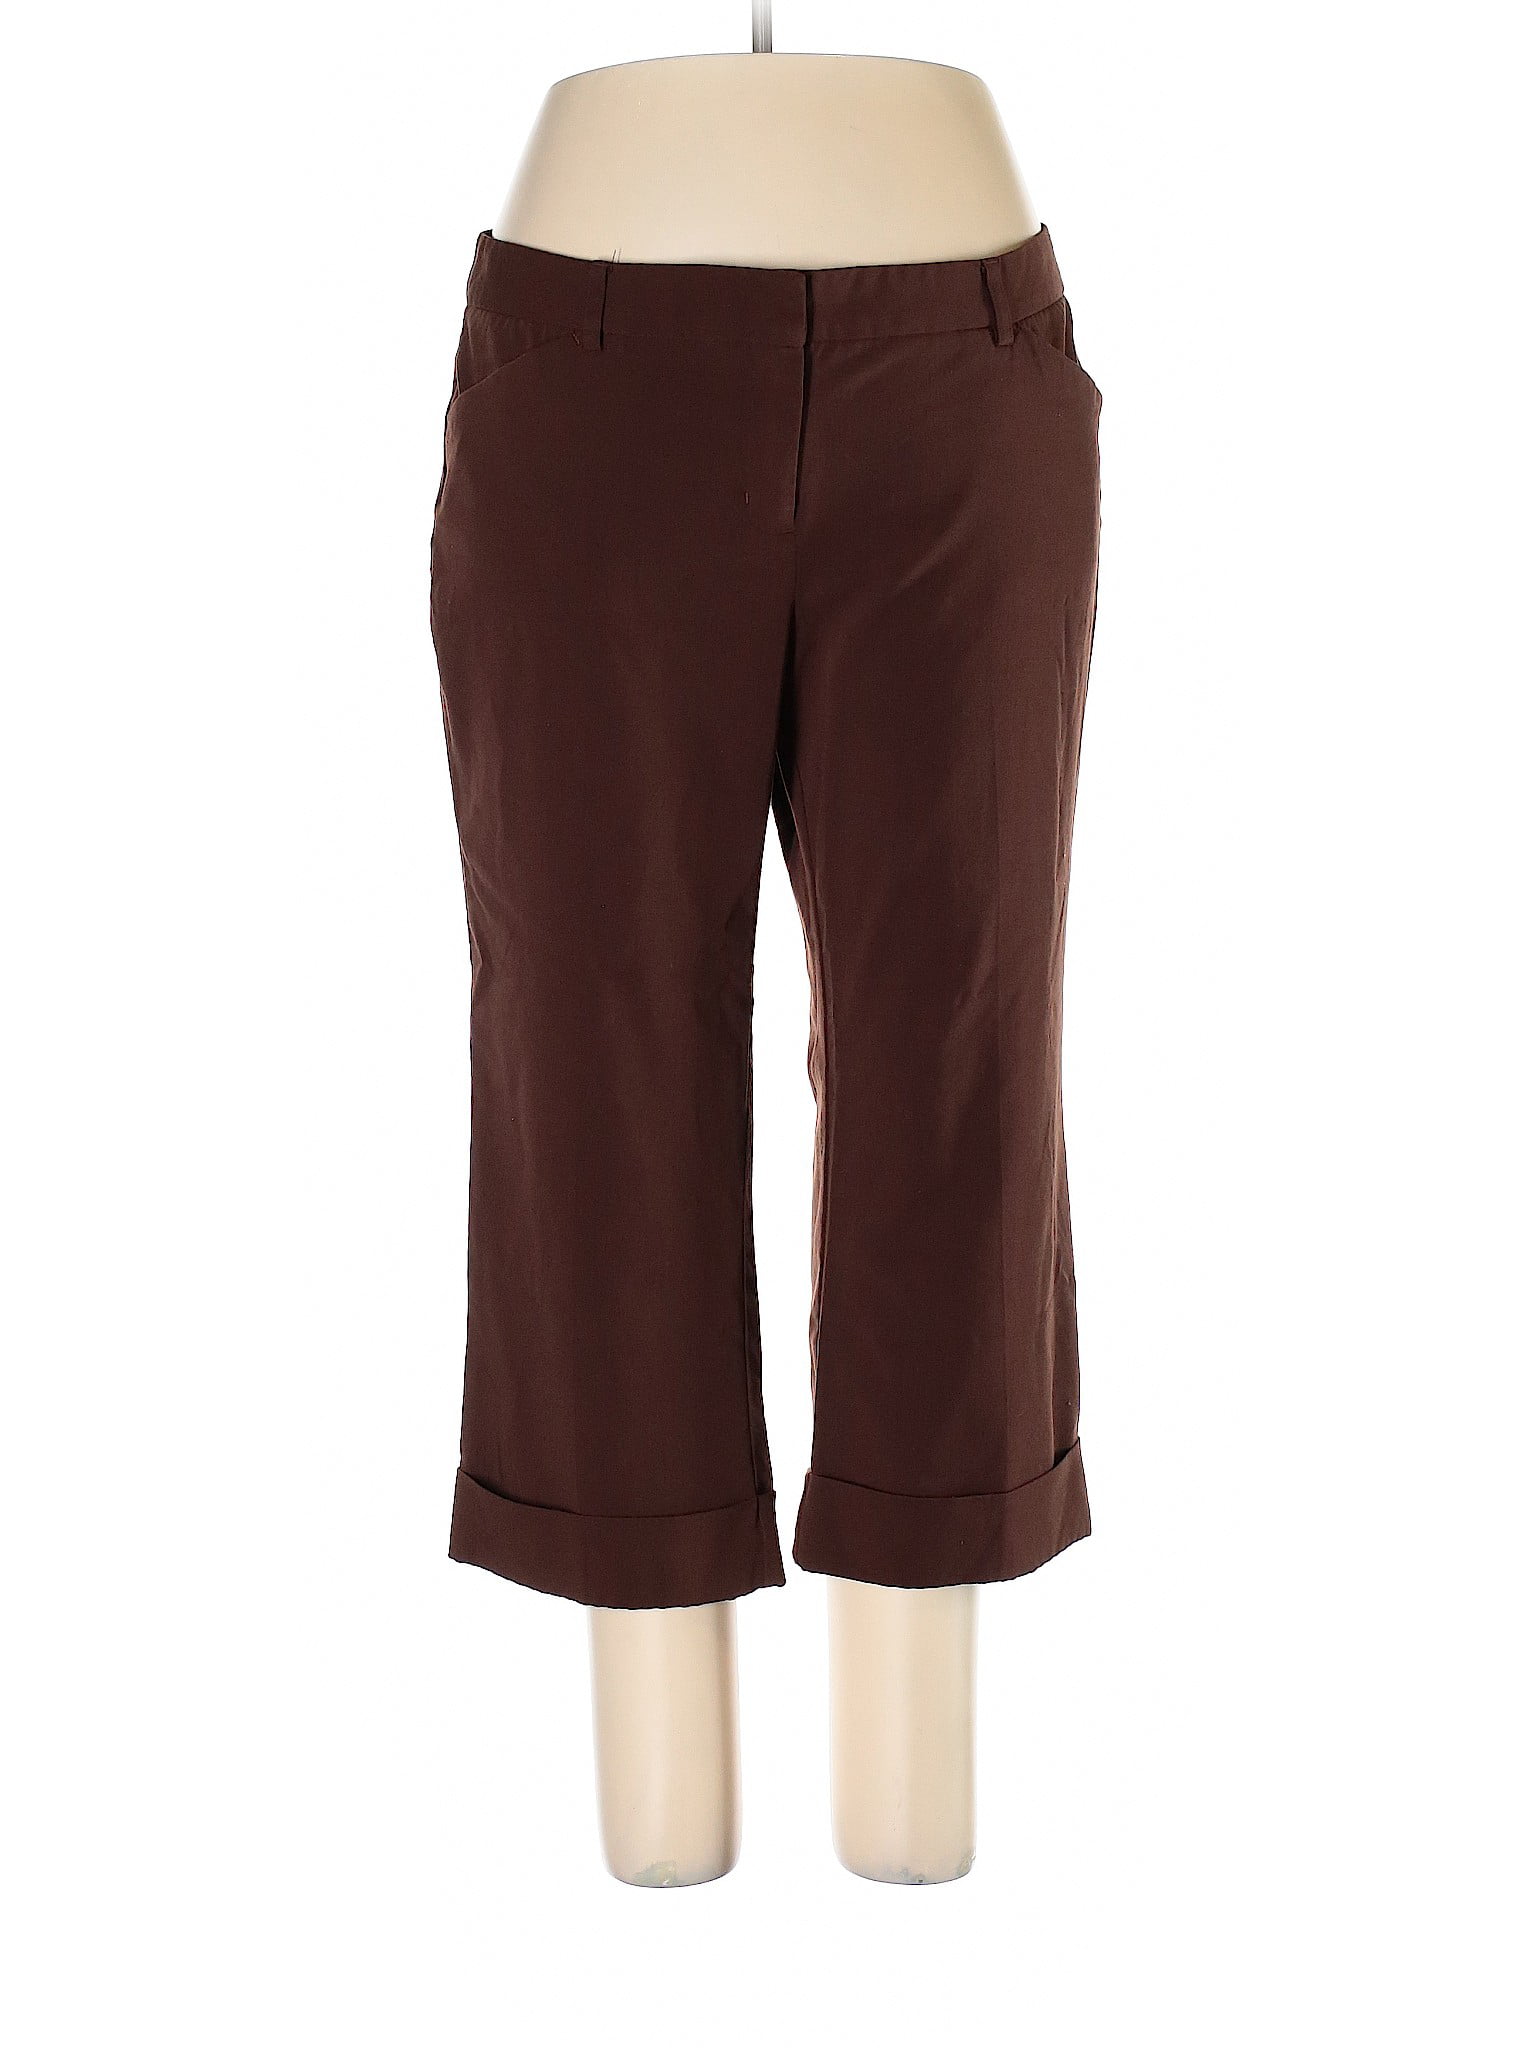 Daisy Fuentes - Pre-Owned Daisy Fuentes Women's Size 16 Dress Pants ...